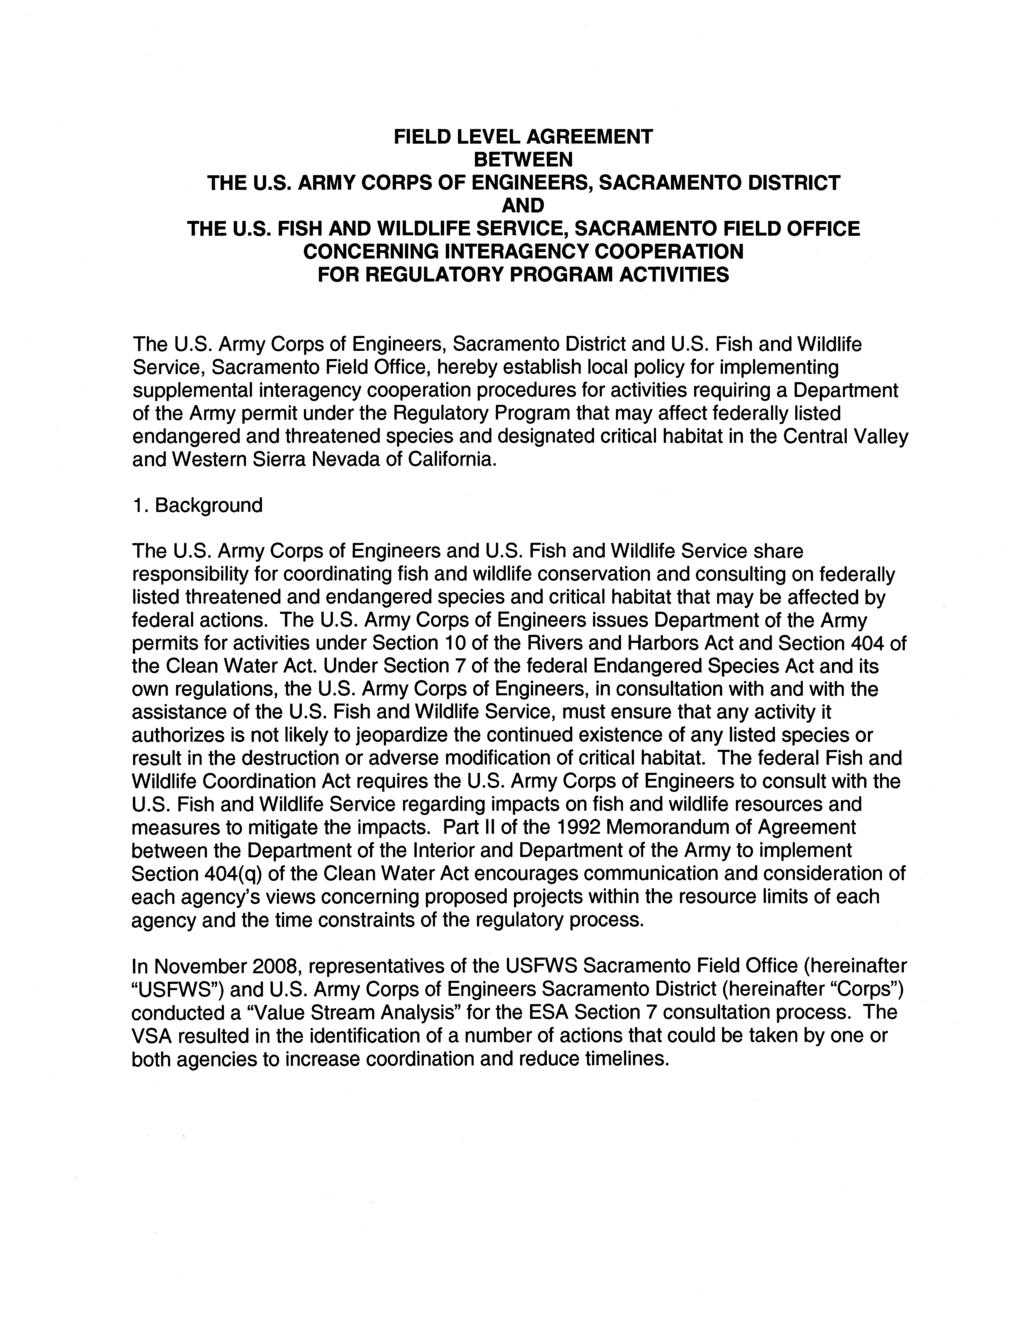 FIELD LEVEL AGREEMENT BETWEEN THE U.S. ARMY CORPS OF ENGINEERS, SACRAMENTO DISTRICT AND THE U.S. FISH AND WILDLIFE SERVICE, SACRAMENTO FIELD OFFICE CONCERNING INTERAGENCY COOPERATION FOR REGULATORY PROGRAM ACTIVITIES The U.